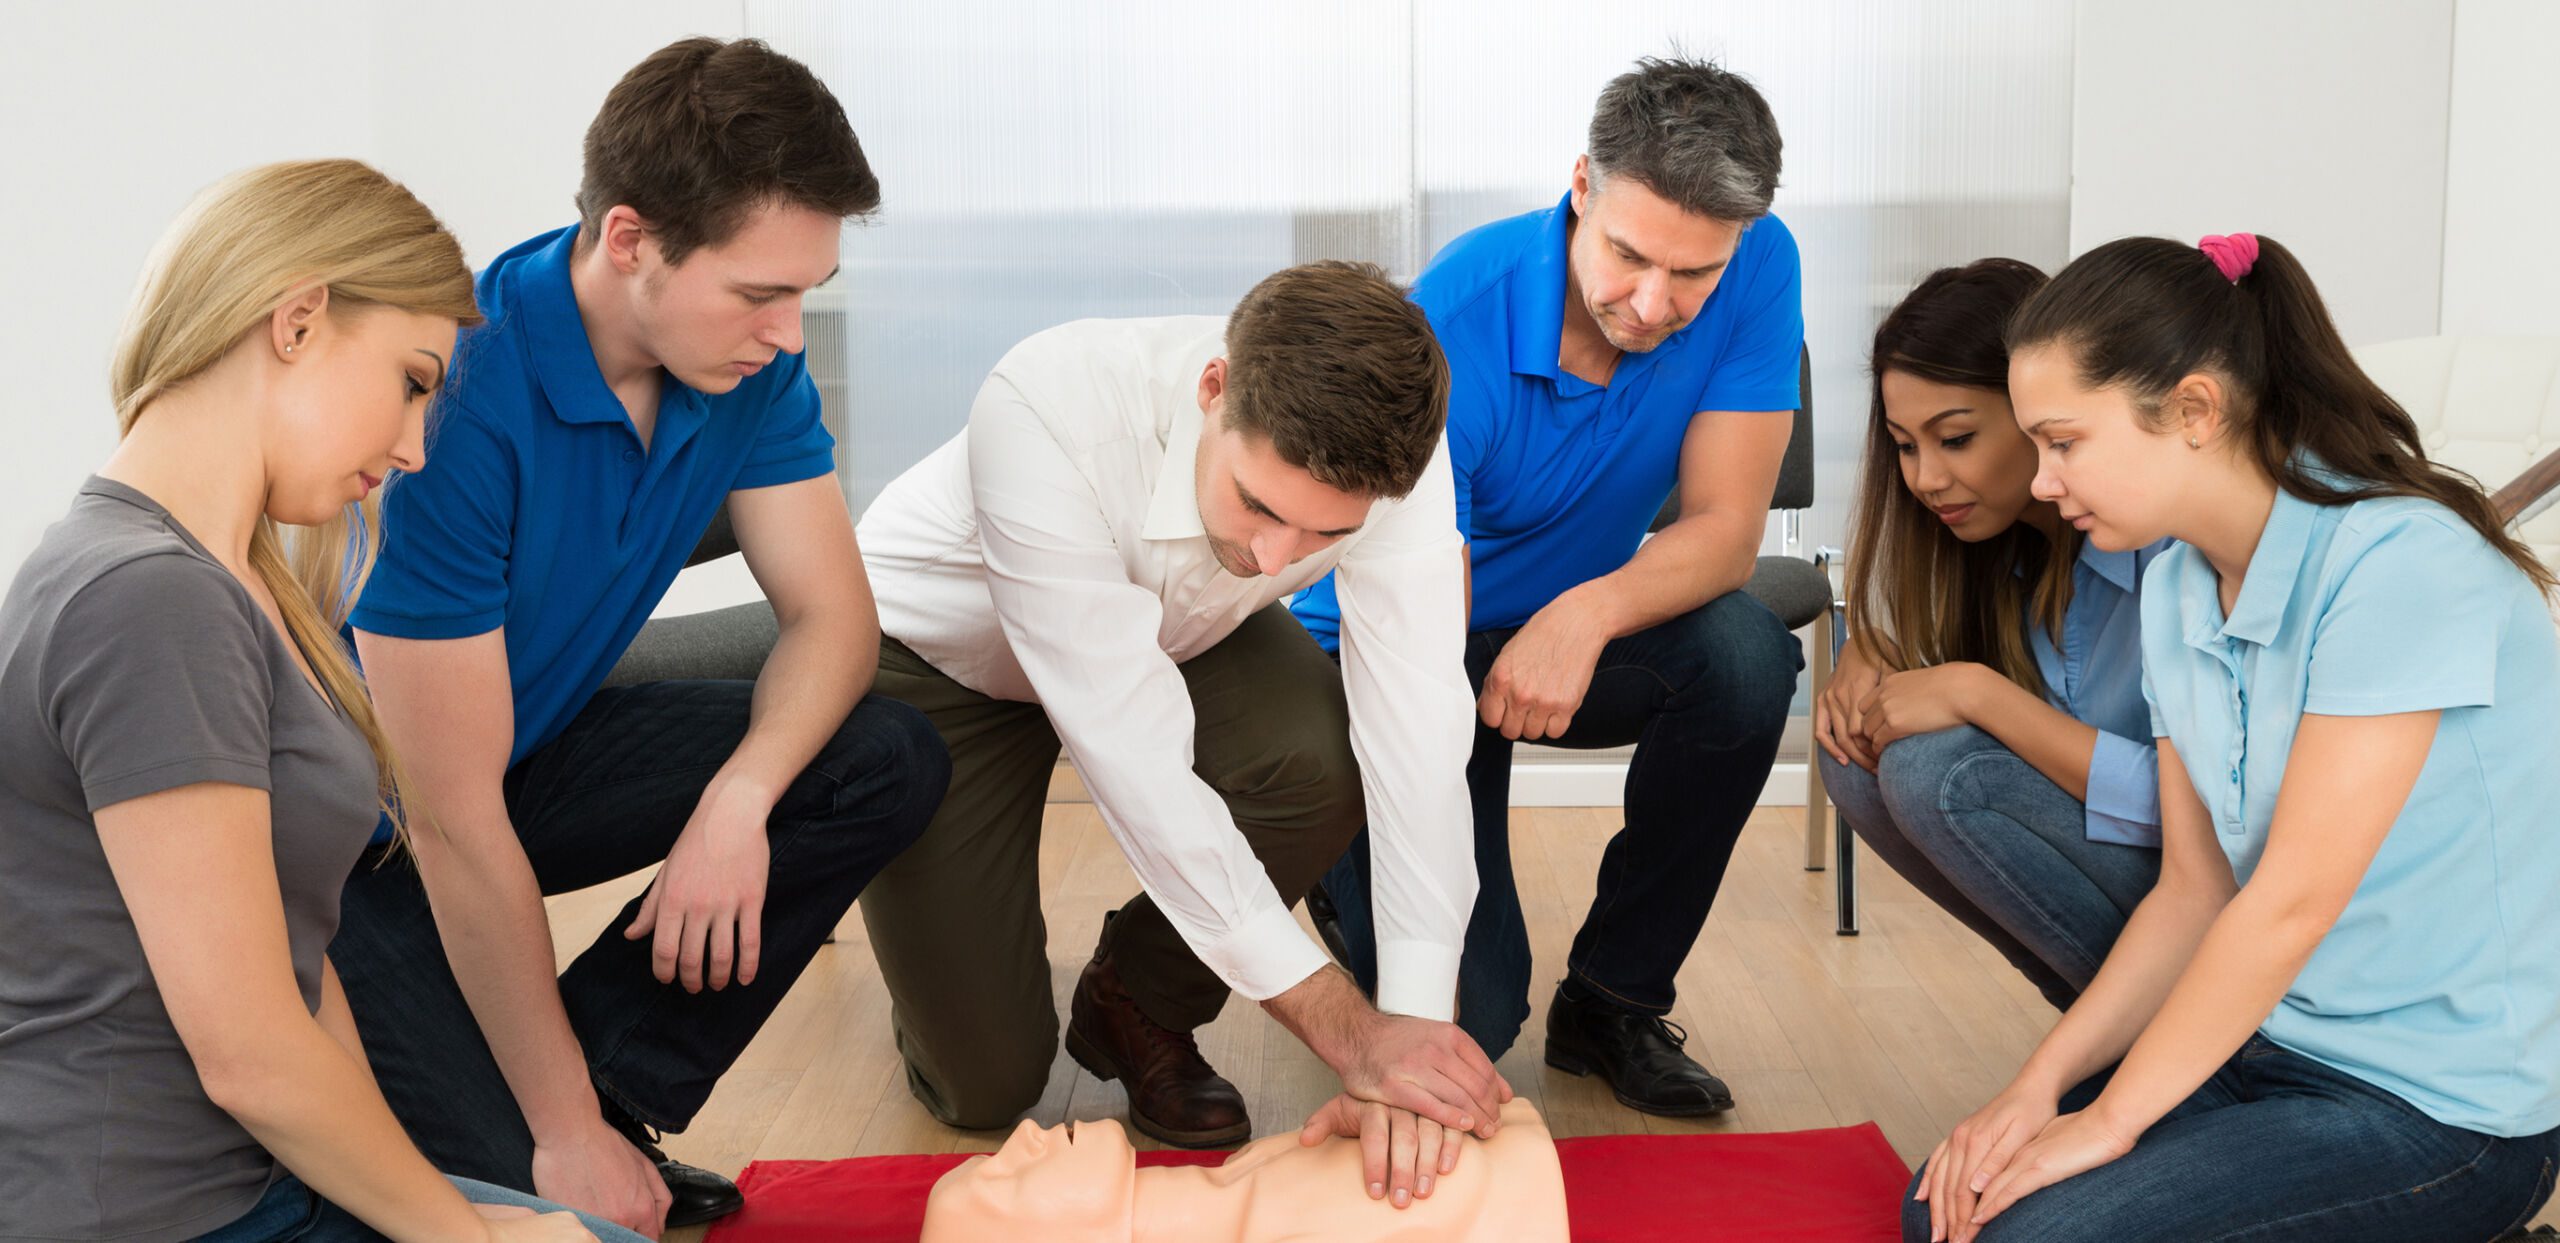 Male instructor demonstrating CPR on training dummy in Basic Life Support class, Cooley Dickinson Hospital, 30 Locust Street, Northampton, MA 01060.